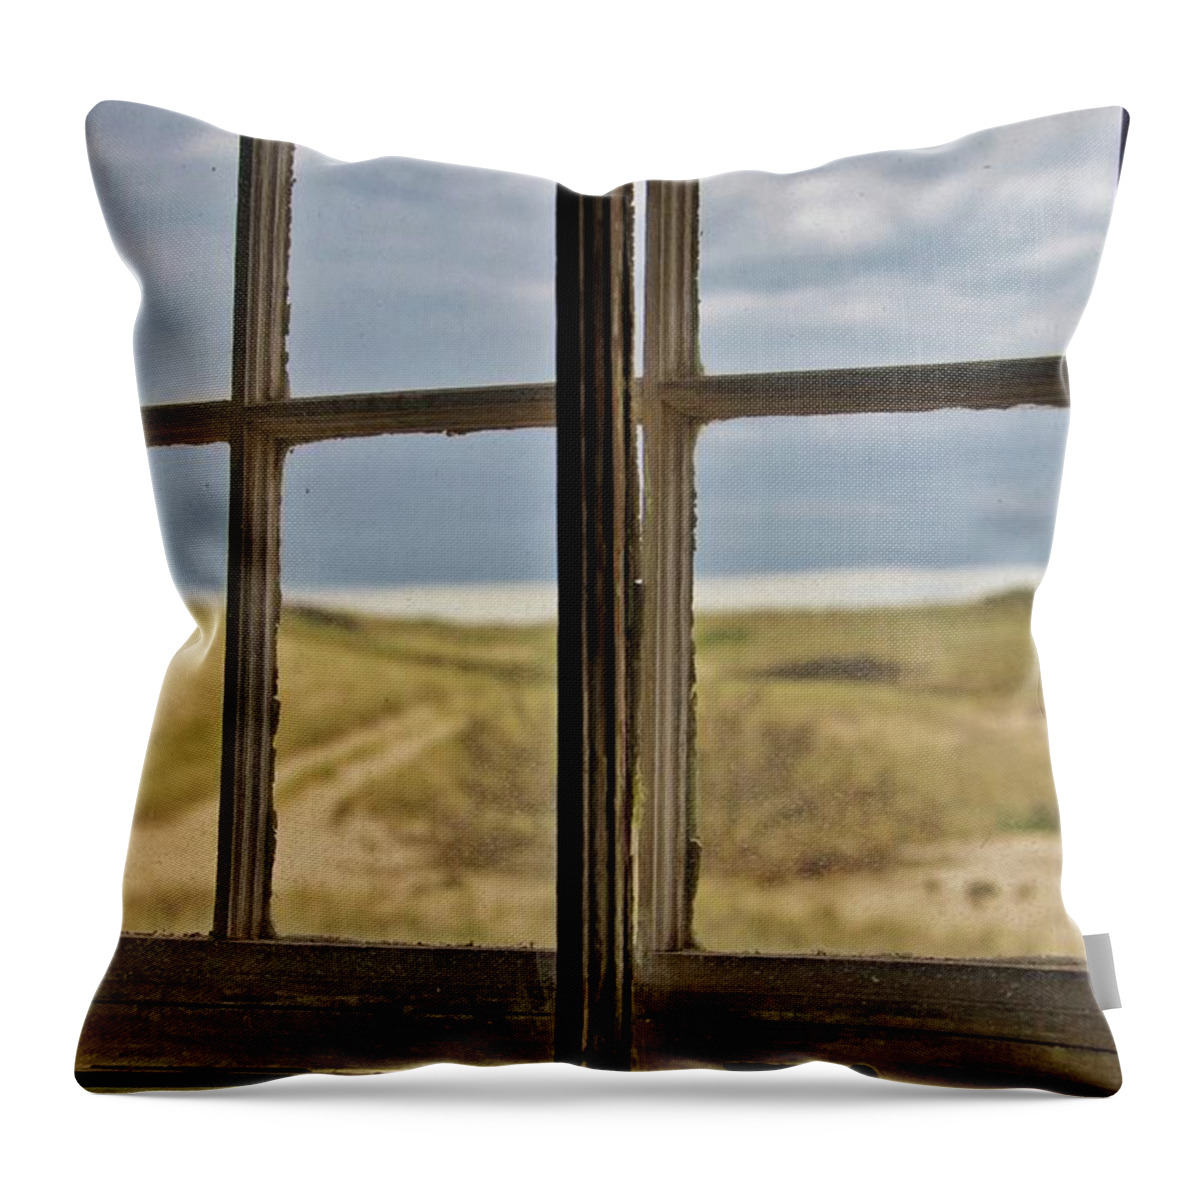 Cape Cod Throw Pillow featuring the photograph Window Ocean Path by Marisa Geraghty Photography